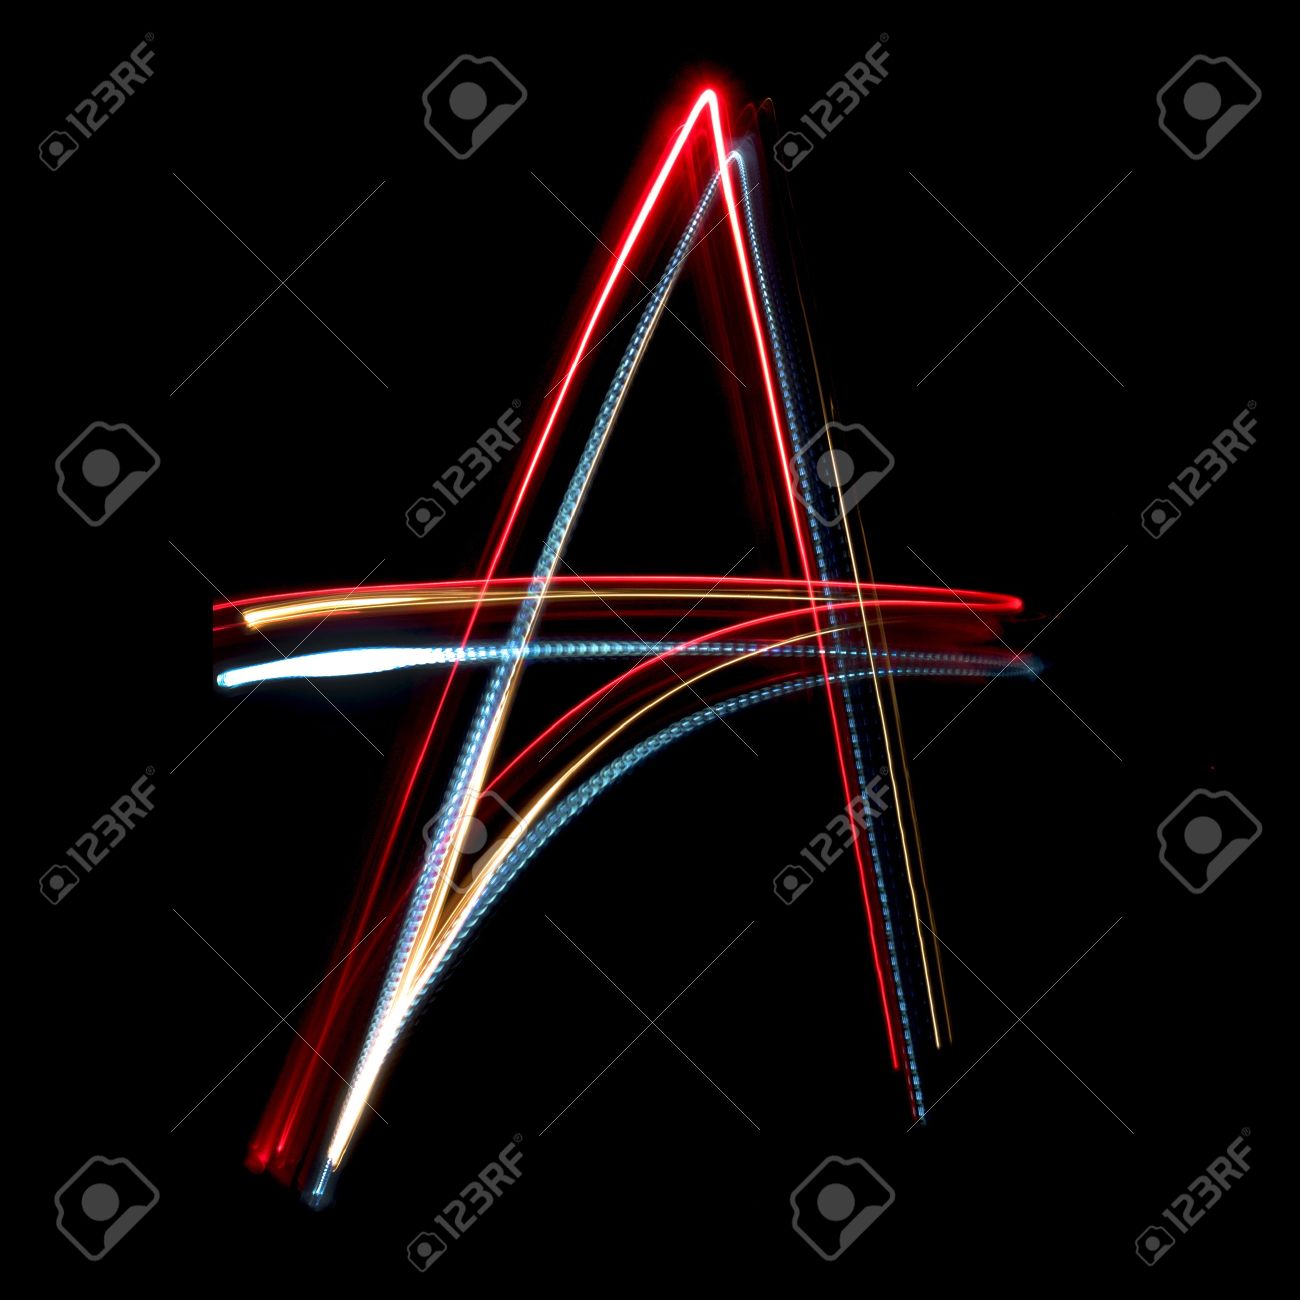 Letter A On A Black Background Made With Light Painting Torches